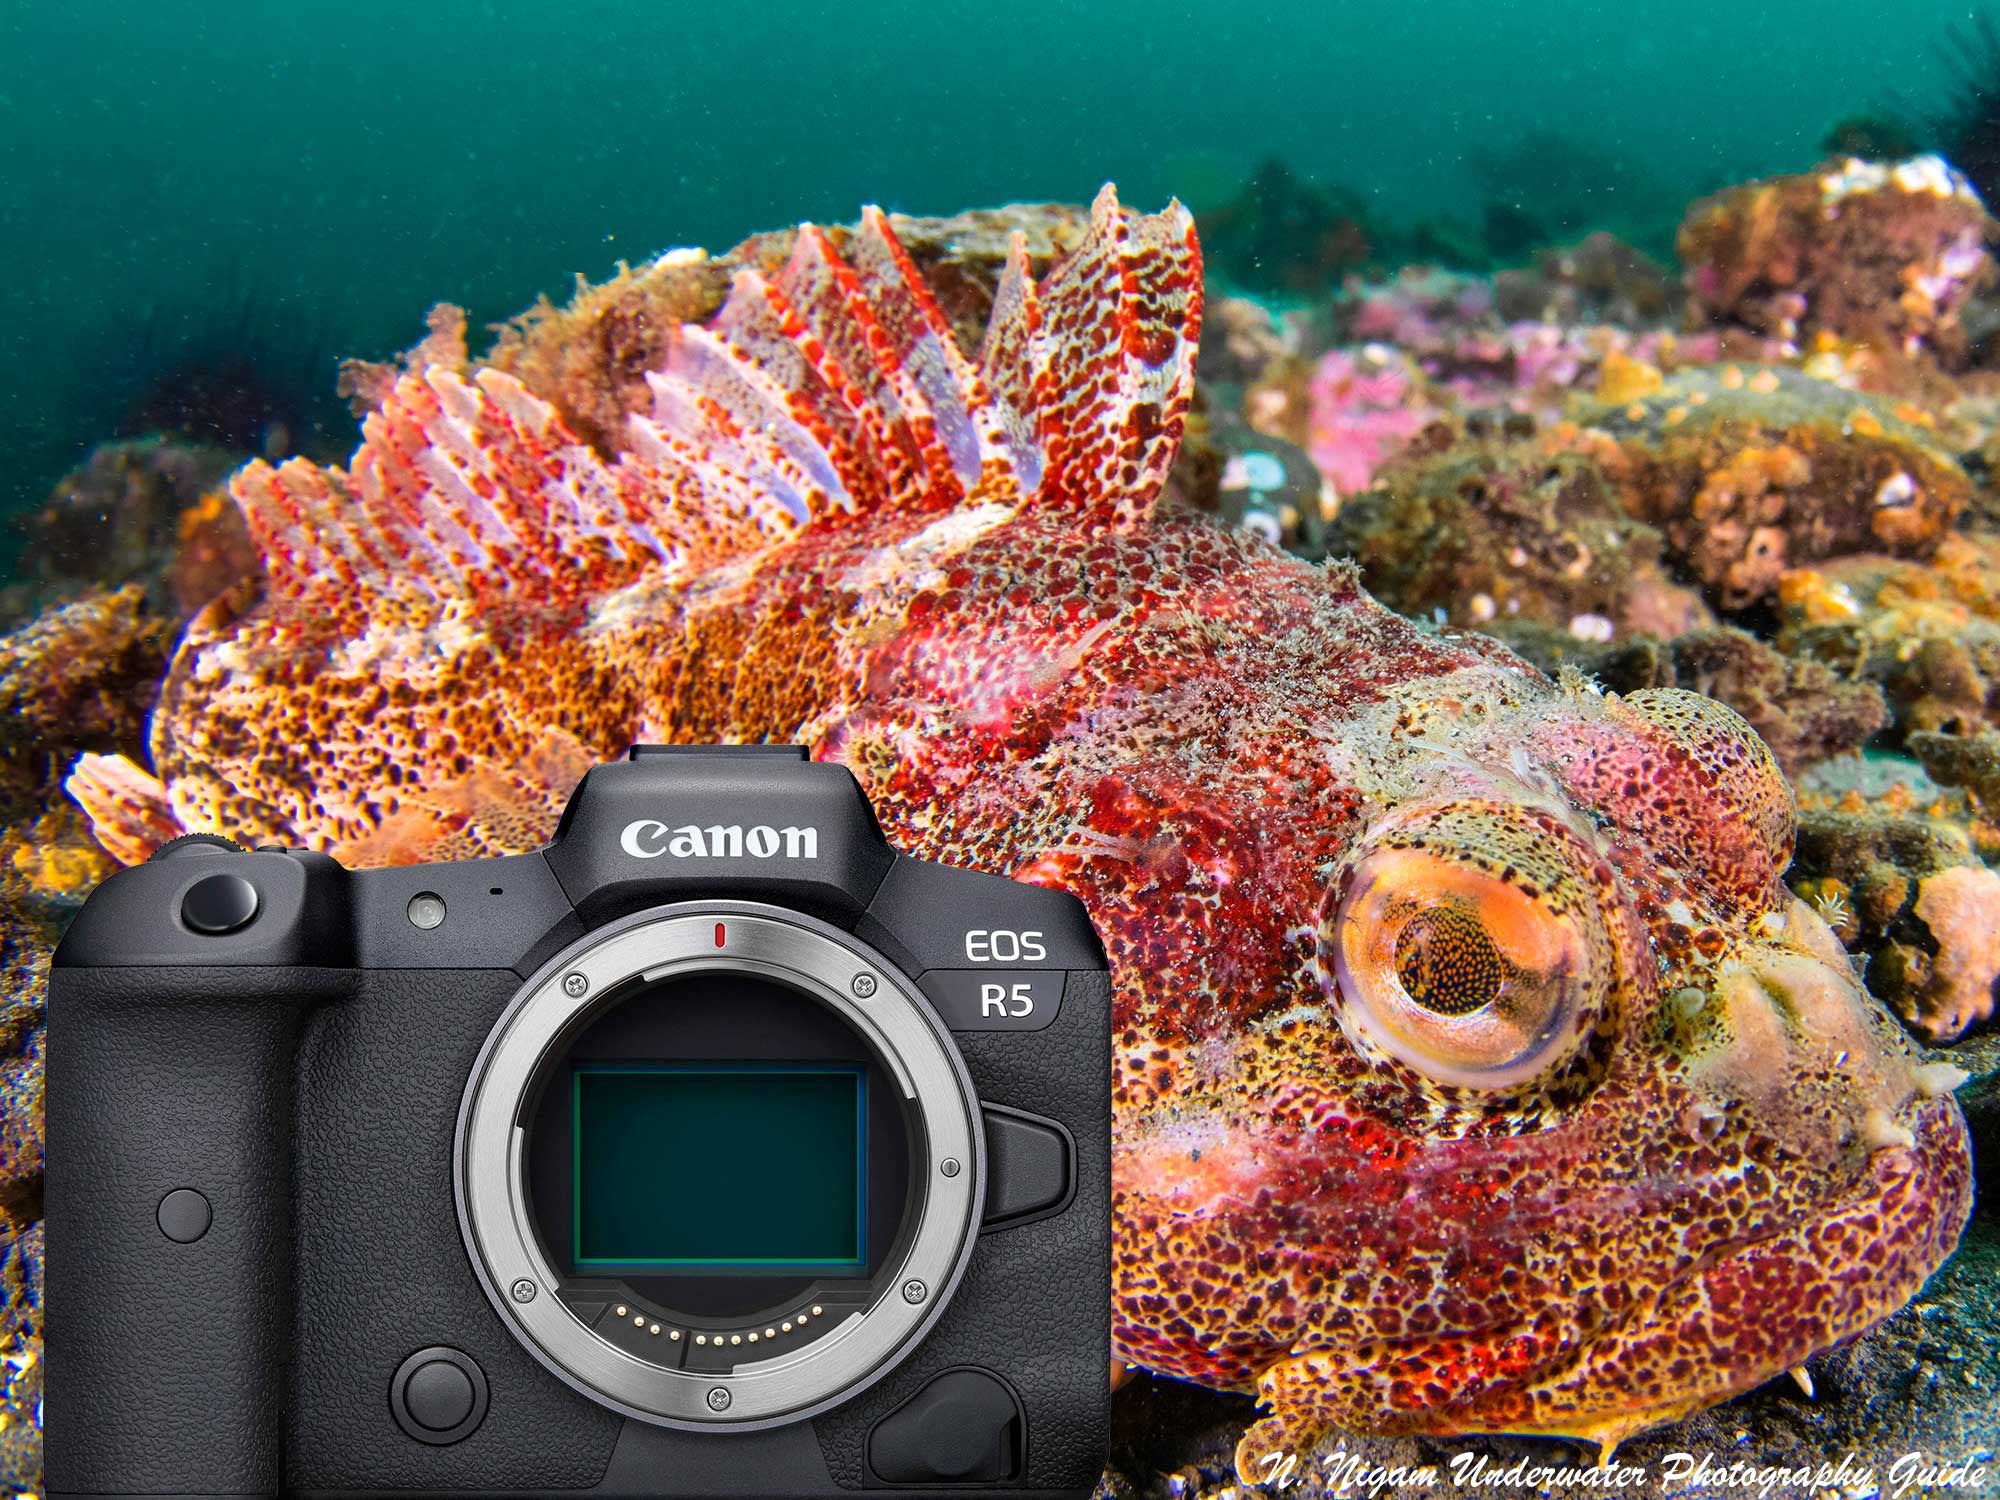 Capture Great Photos in Blue Water - Underwater Photography Guide